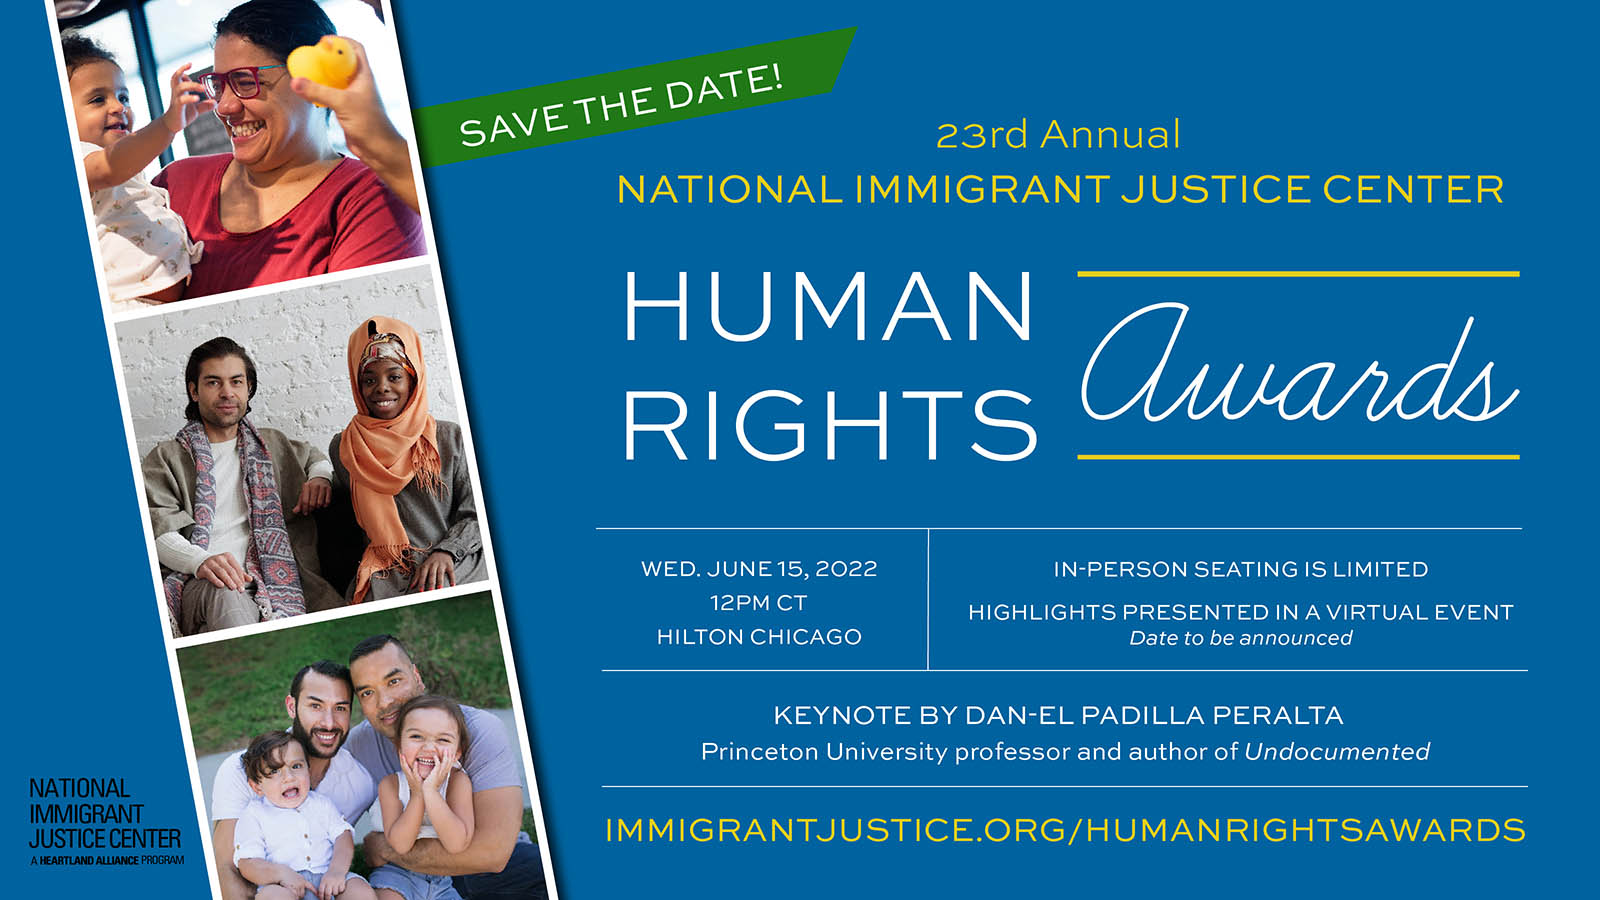 Save the date graphic for the 23rd Annual NIJC Human Rights Awards on June 15, 2022